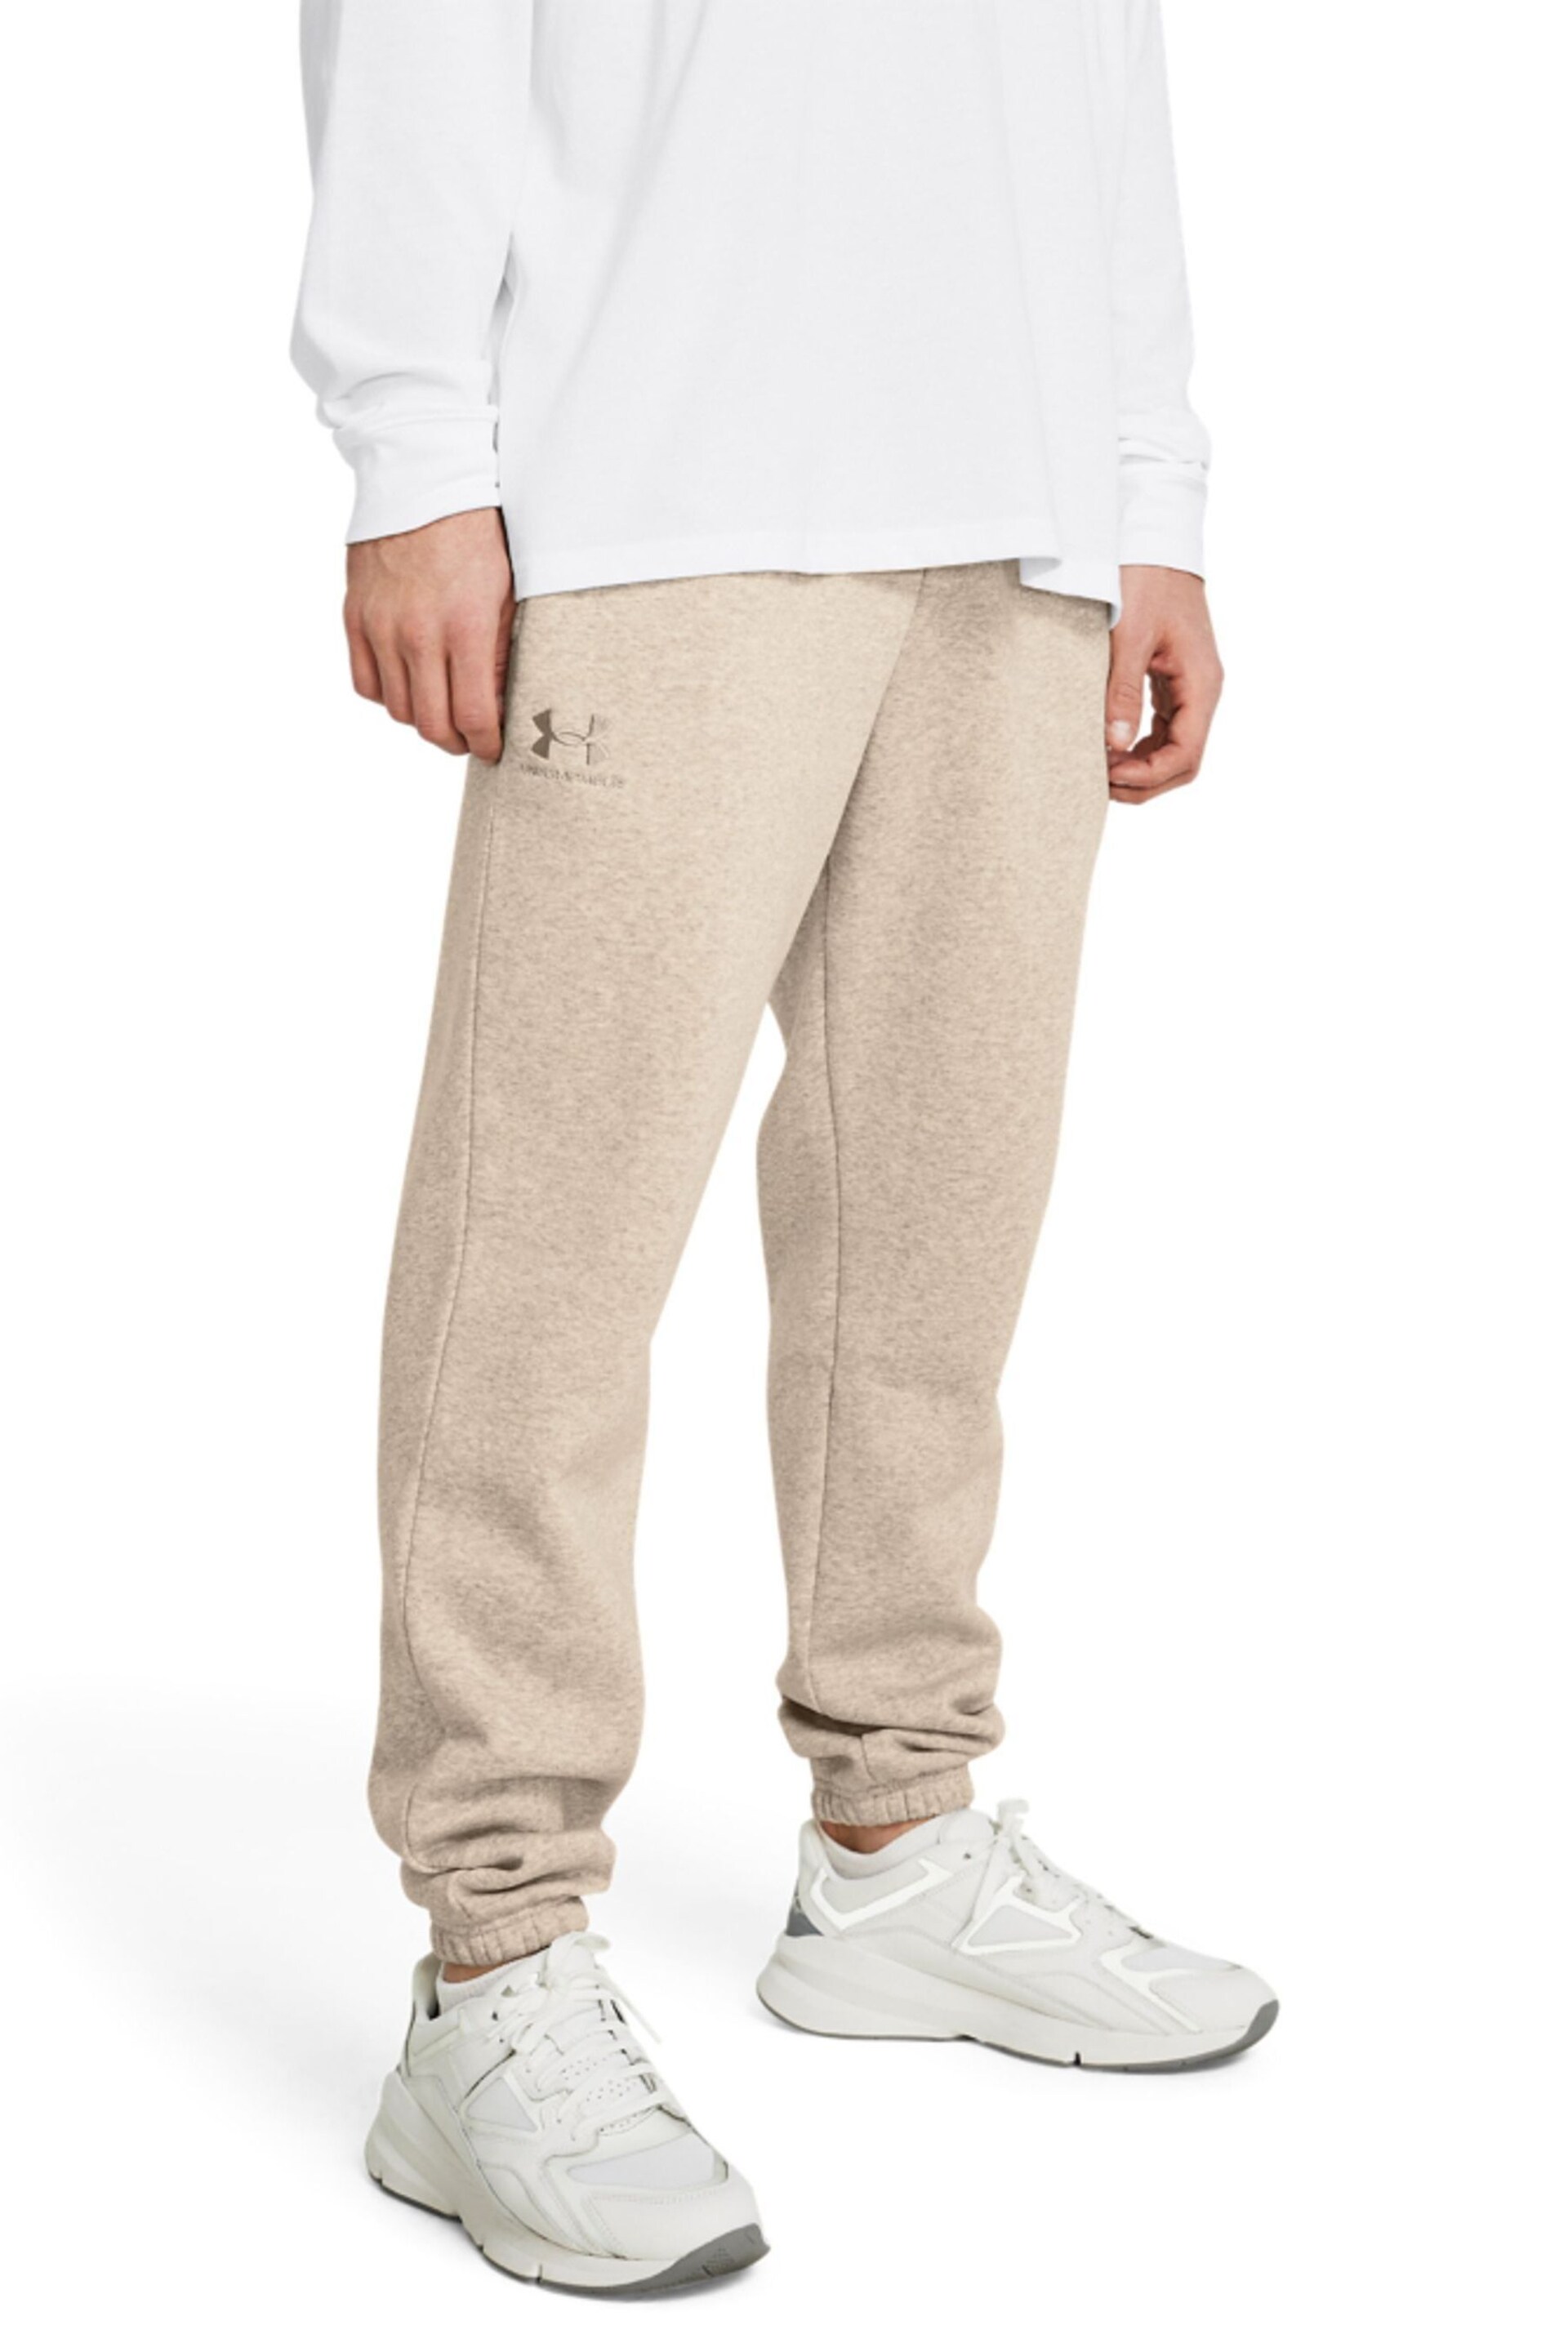 Under Armour Beige Under Armour Beige Icon Fleece Joggers - Image 1 of 7